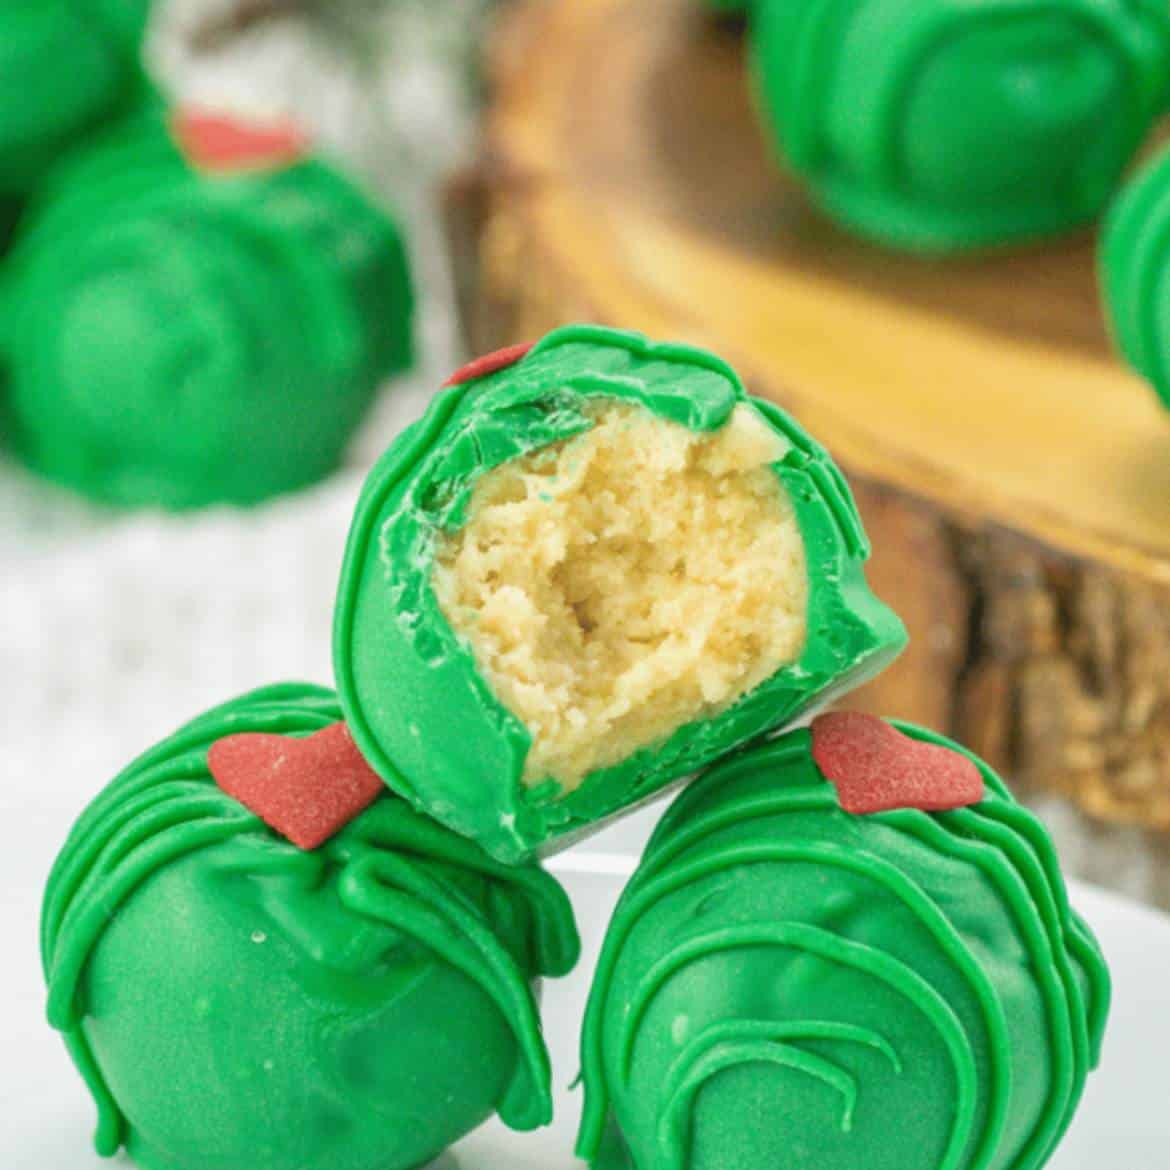 Golden one inch dough balls covered in Grinch green candy melt and decorated with small red hearts.